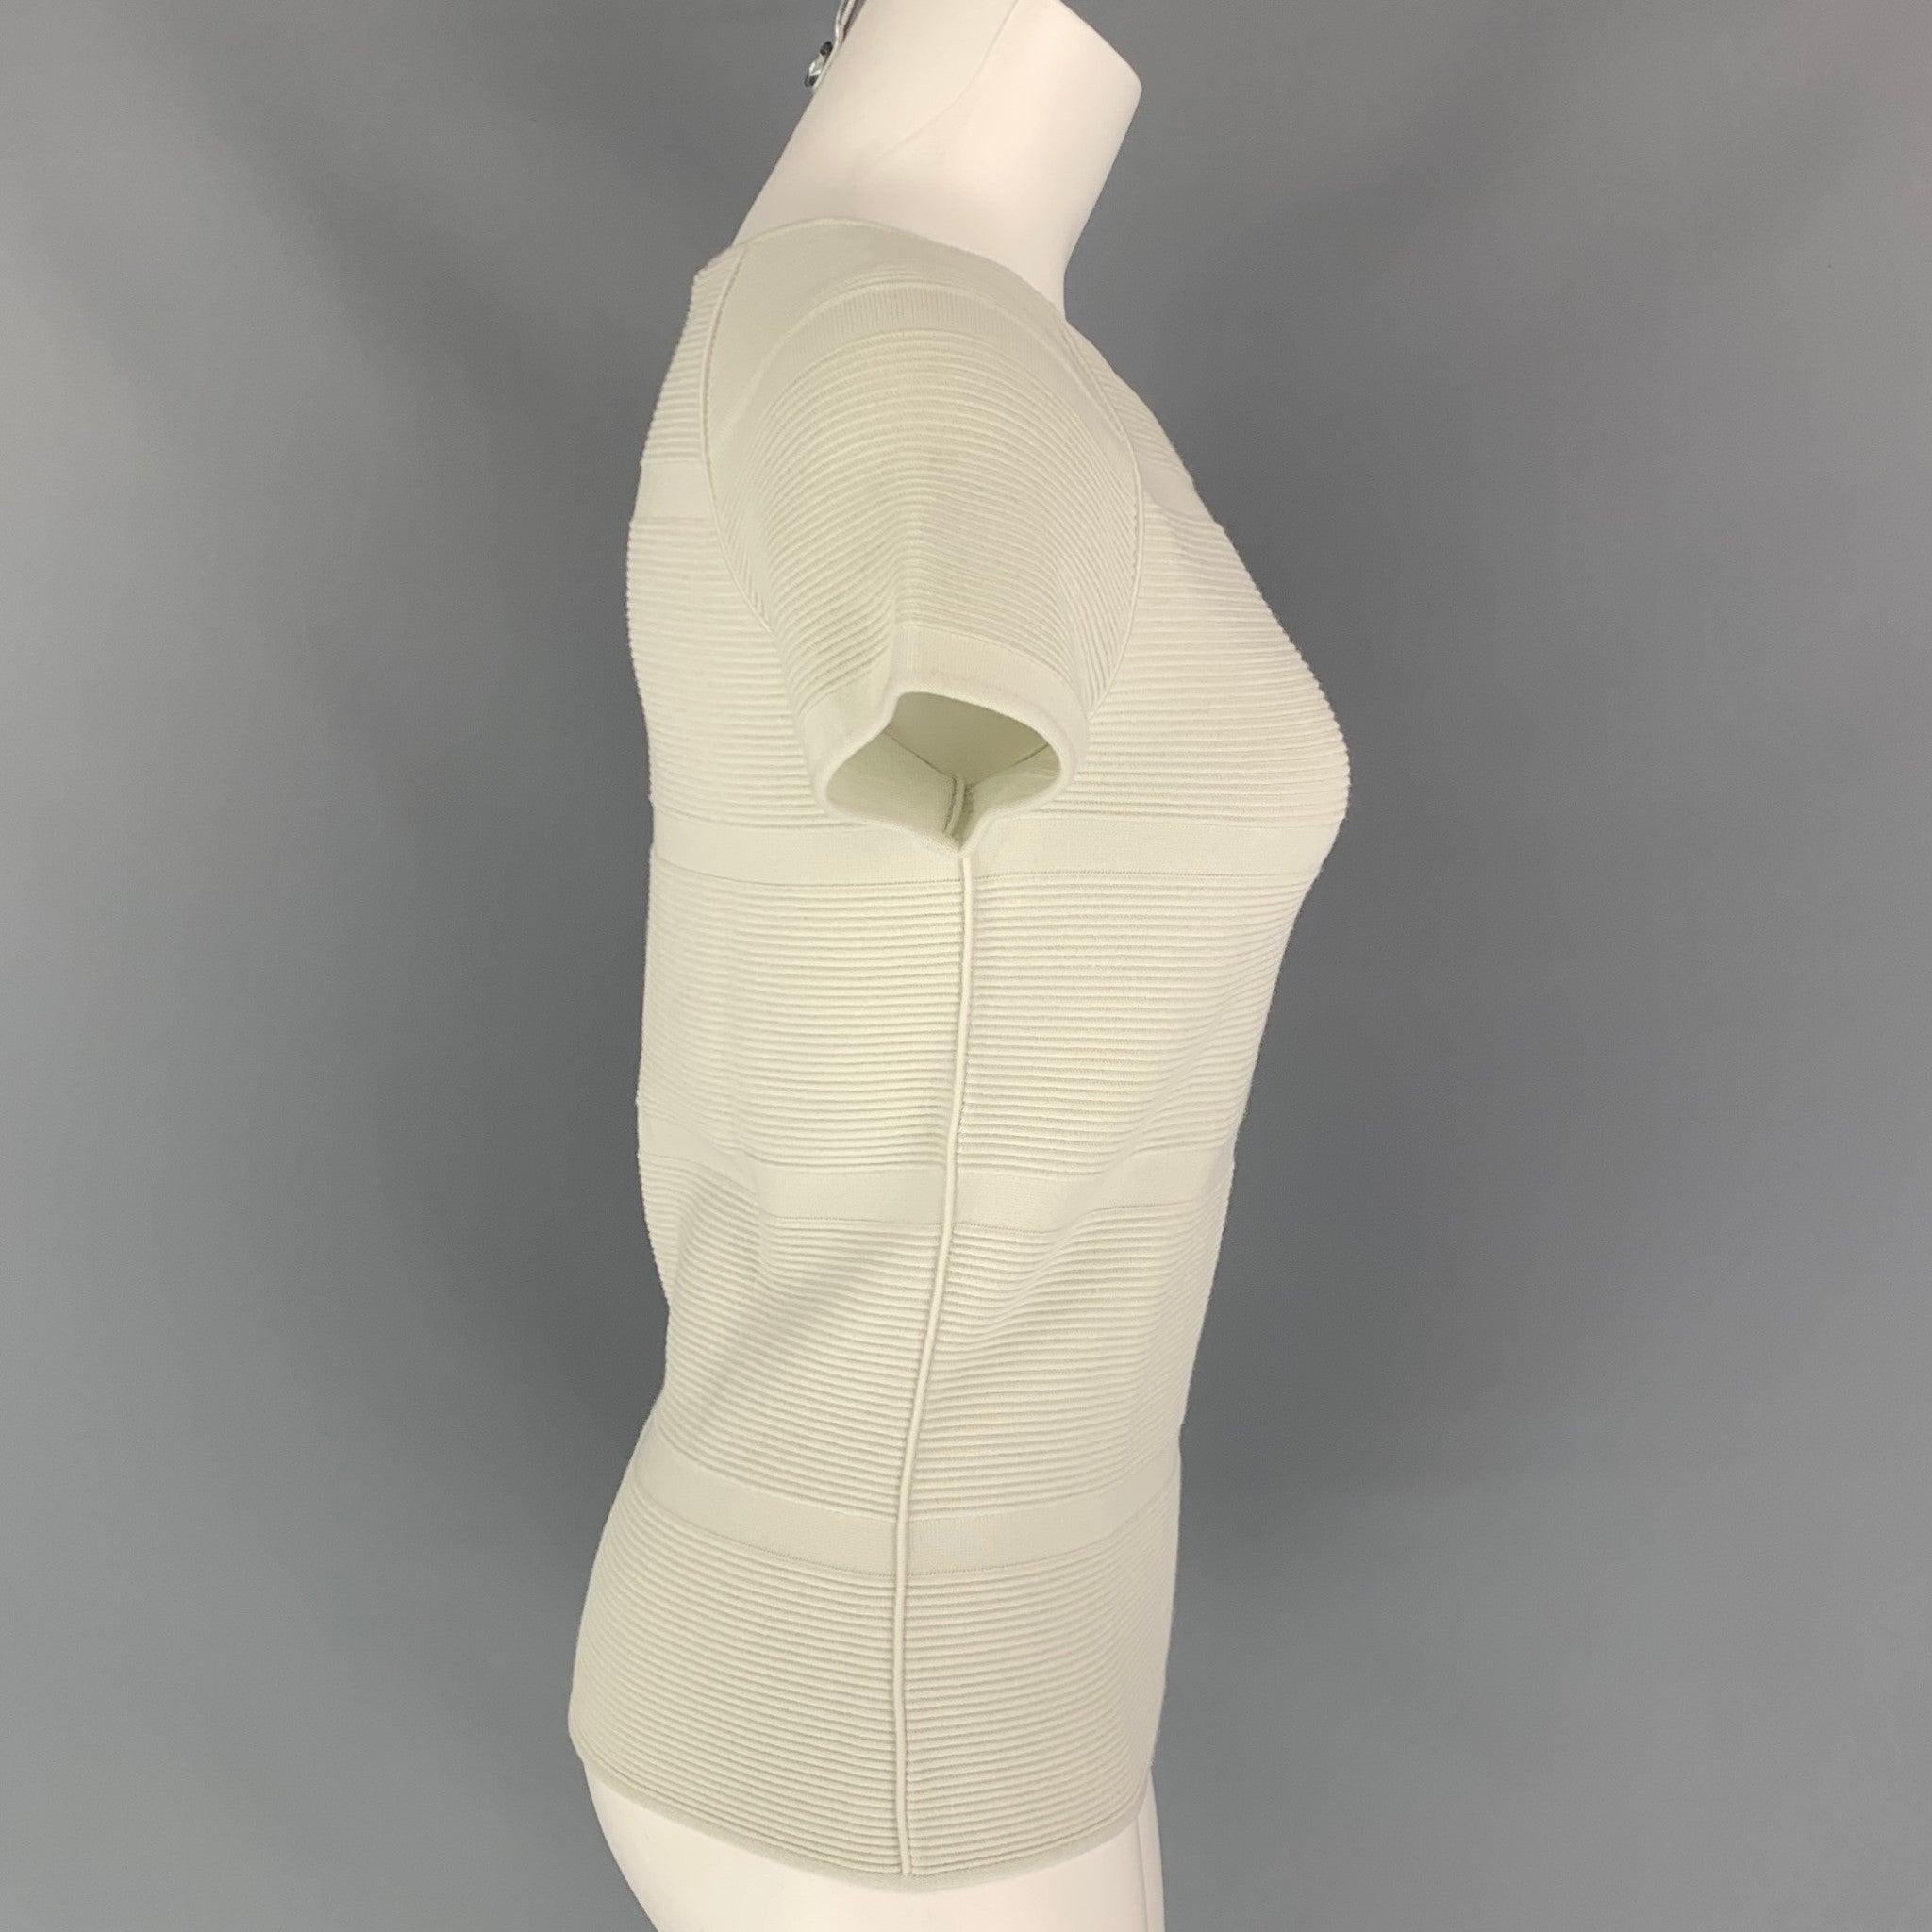 GIORGIO ARMANI casual top comes in a sea foam ribbed viscose / polyester featuring short sleeves and a boat neckline. Comes with tags. Made in Italy.Very Good
Pre-Owned Condition. Minor marks ar front.  

Marked:   40 

Measurements: 
 
Shoulder: 17